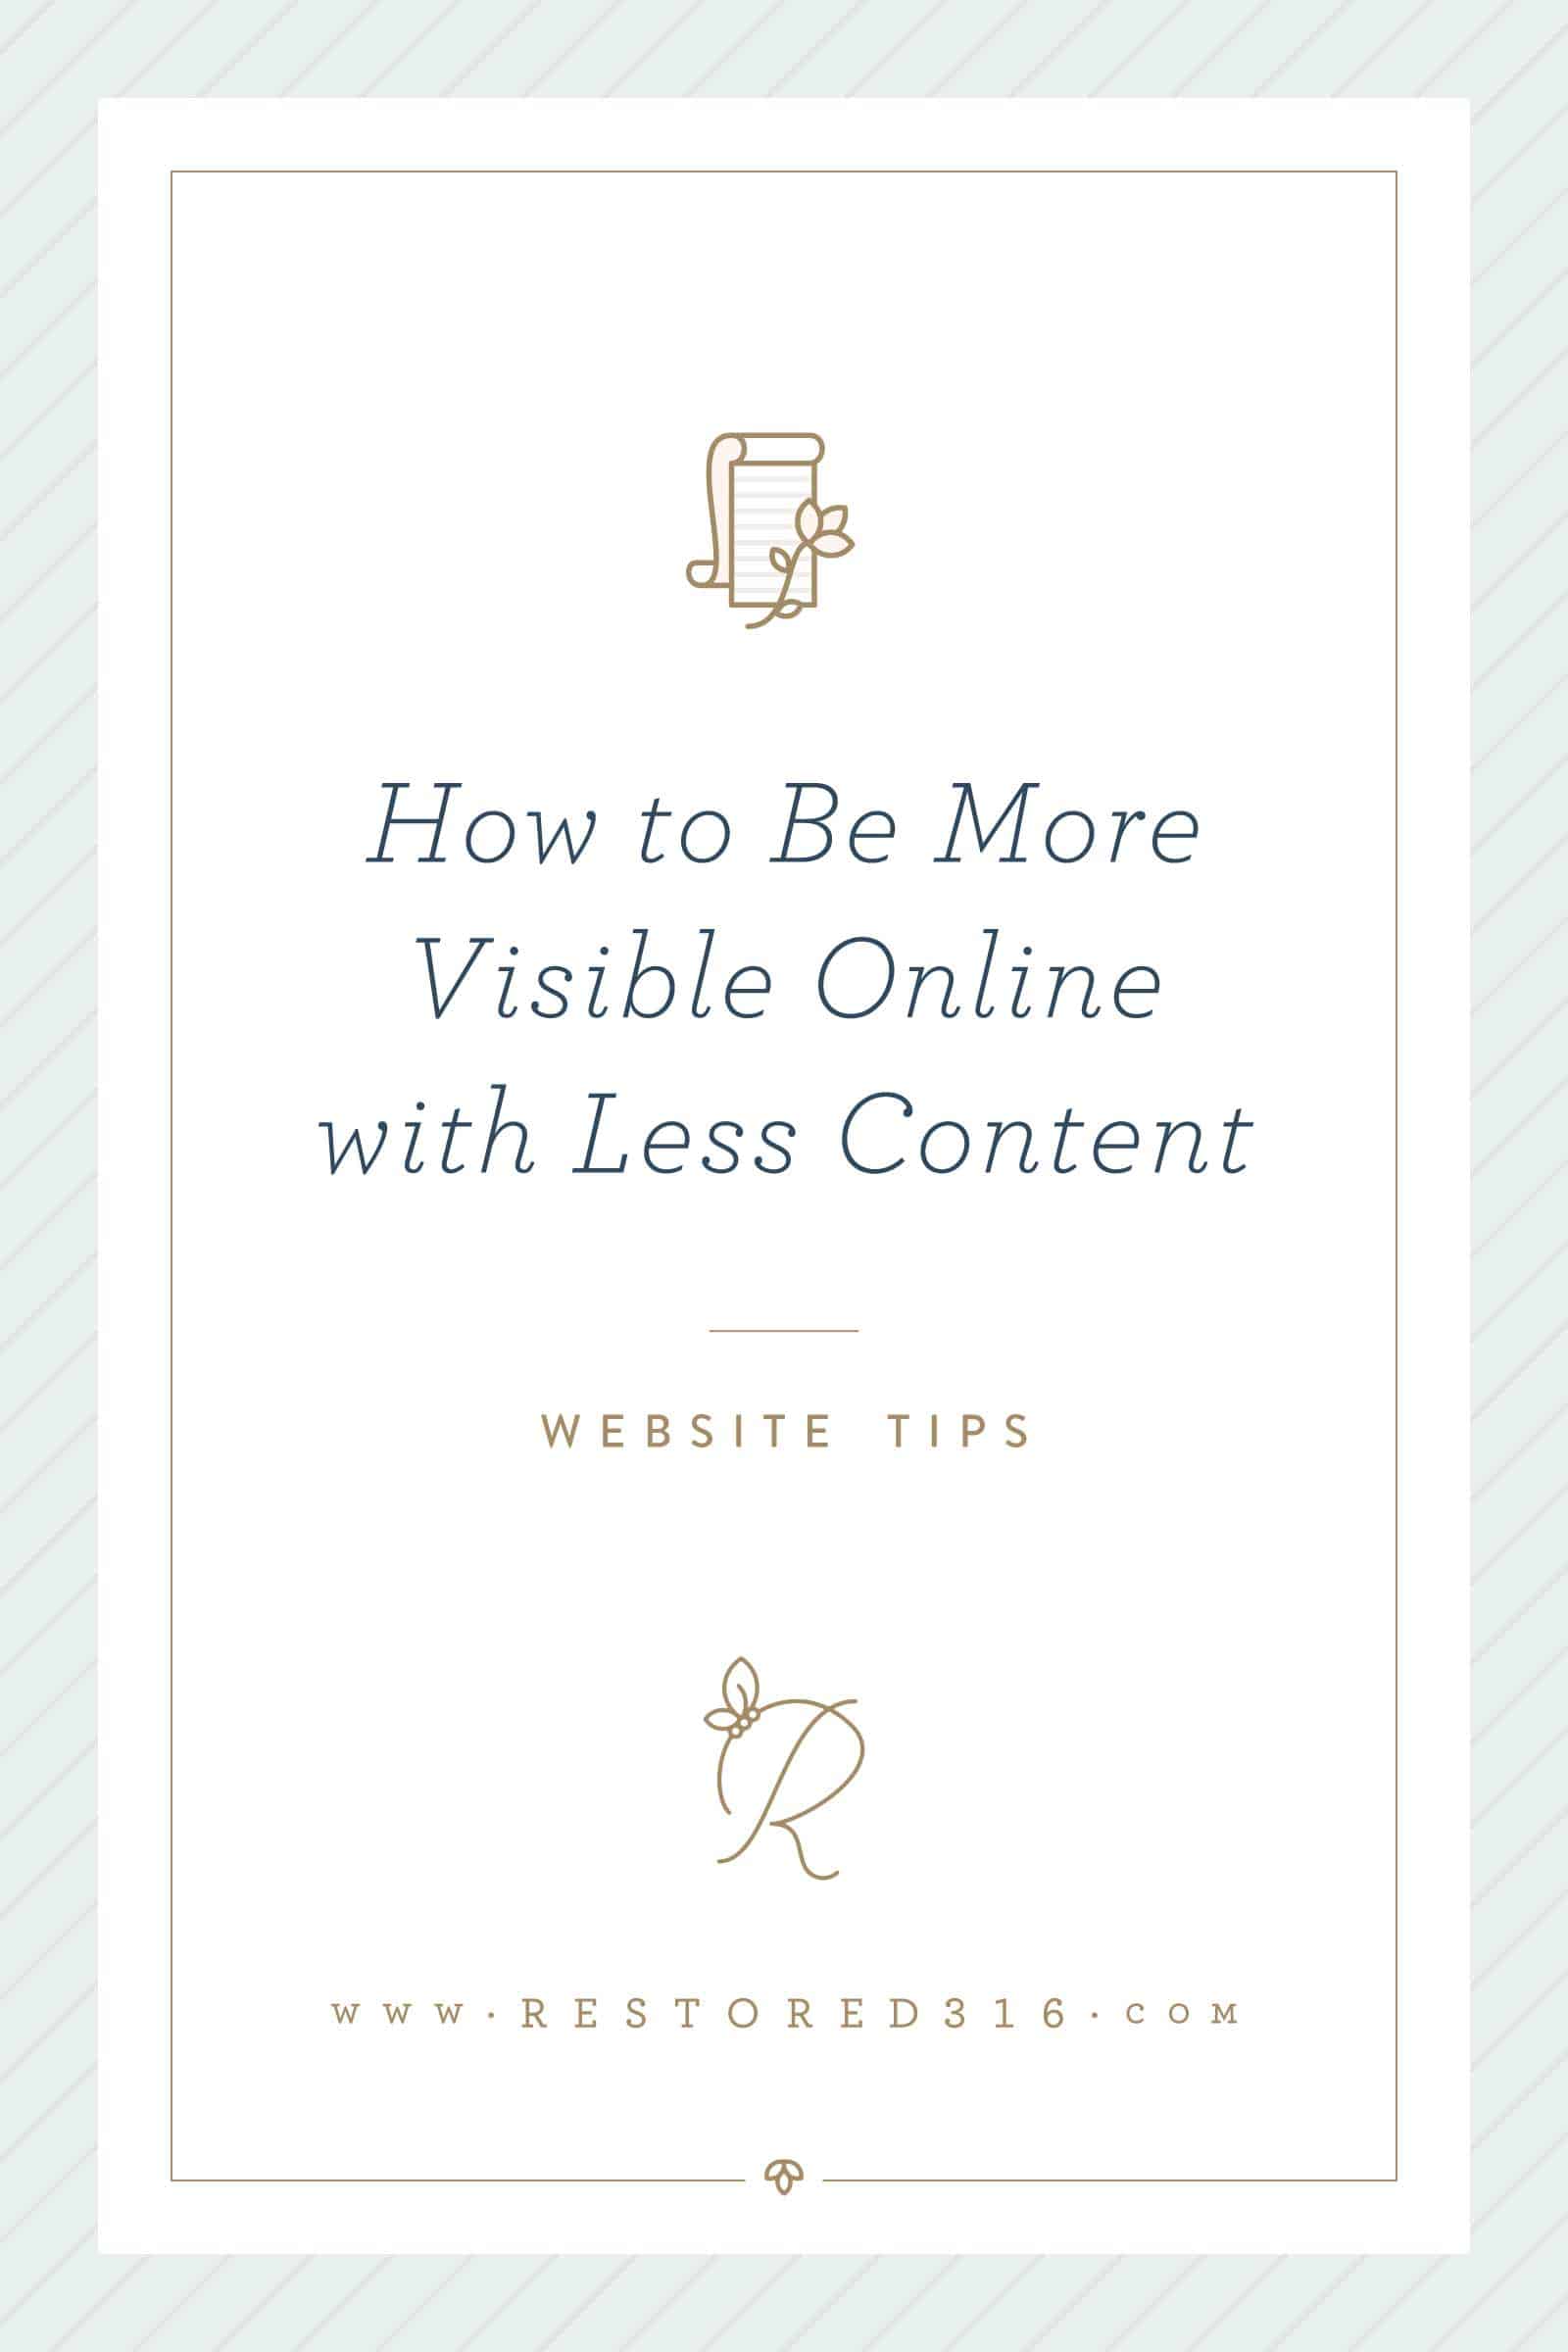 How to Be More Visible Online with Less Content